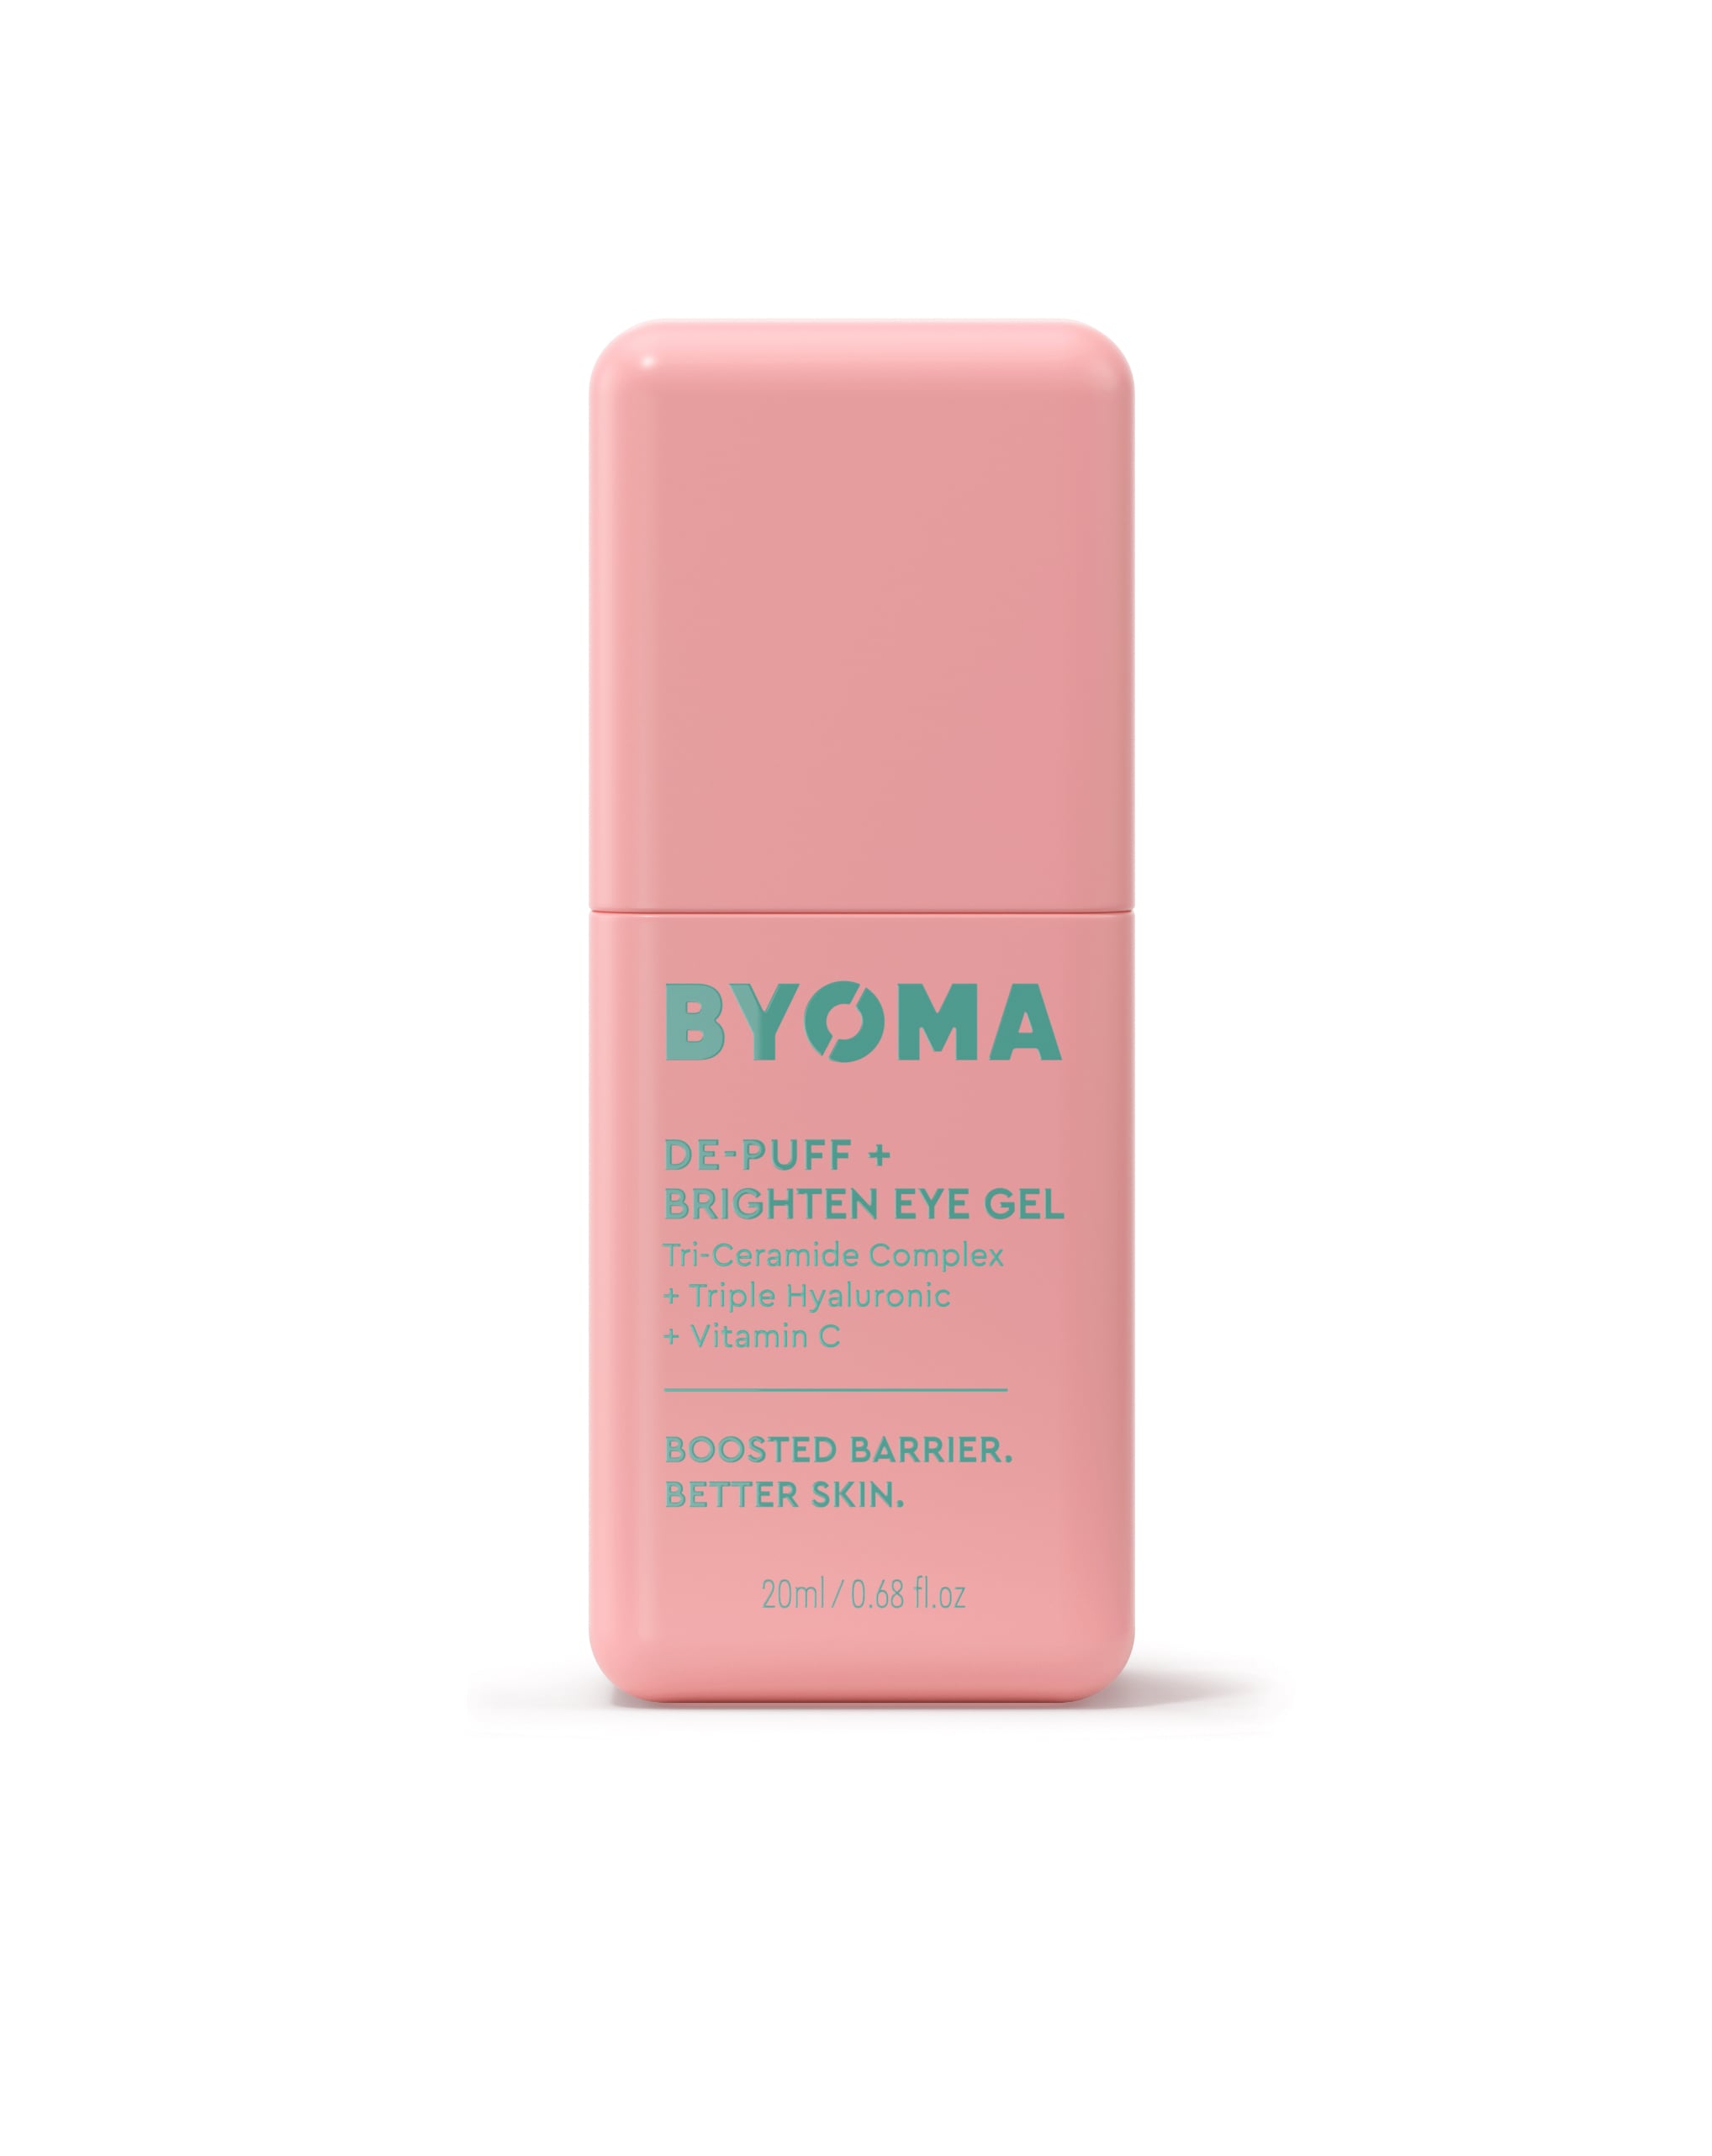 ad My new go-to skin care products from @byoma! I can't believe the C